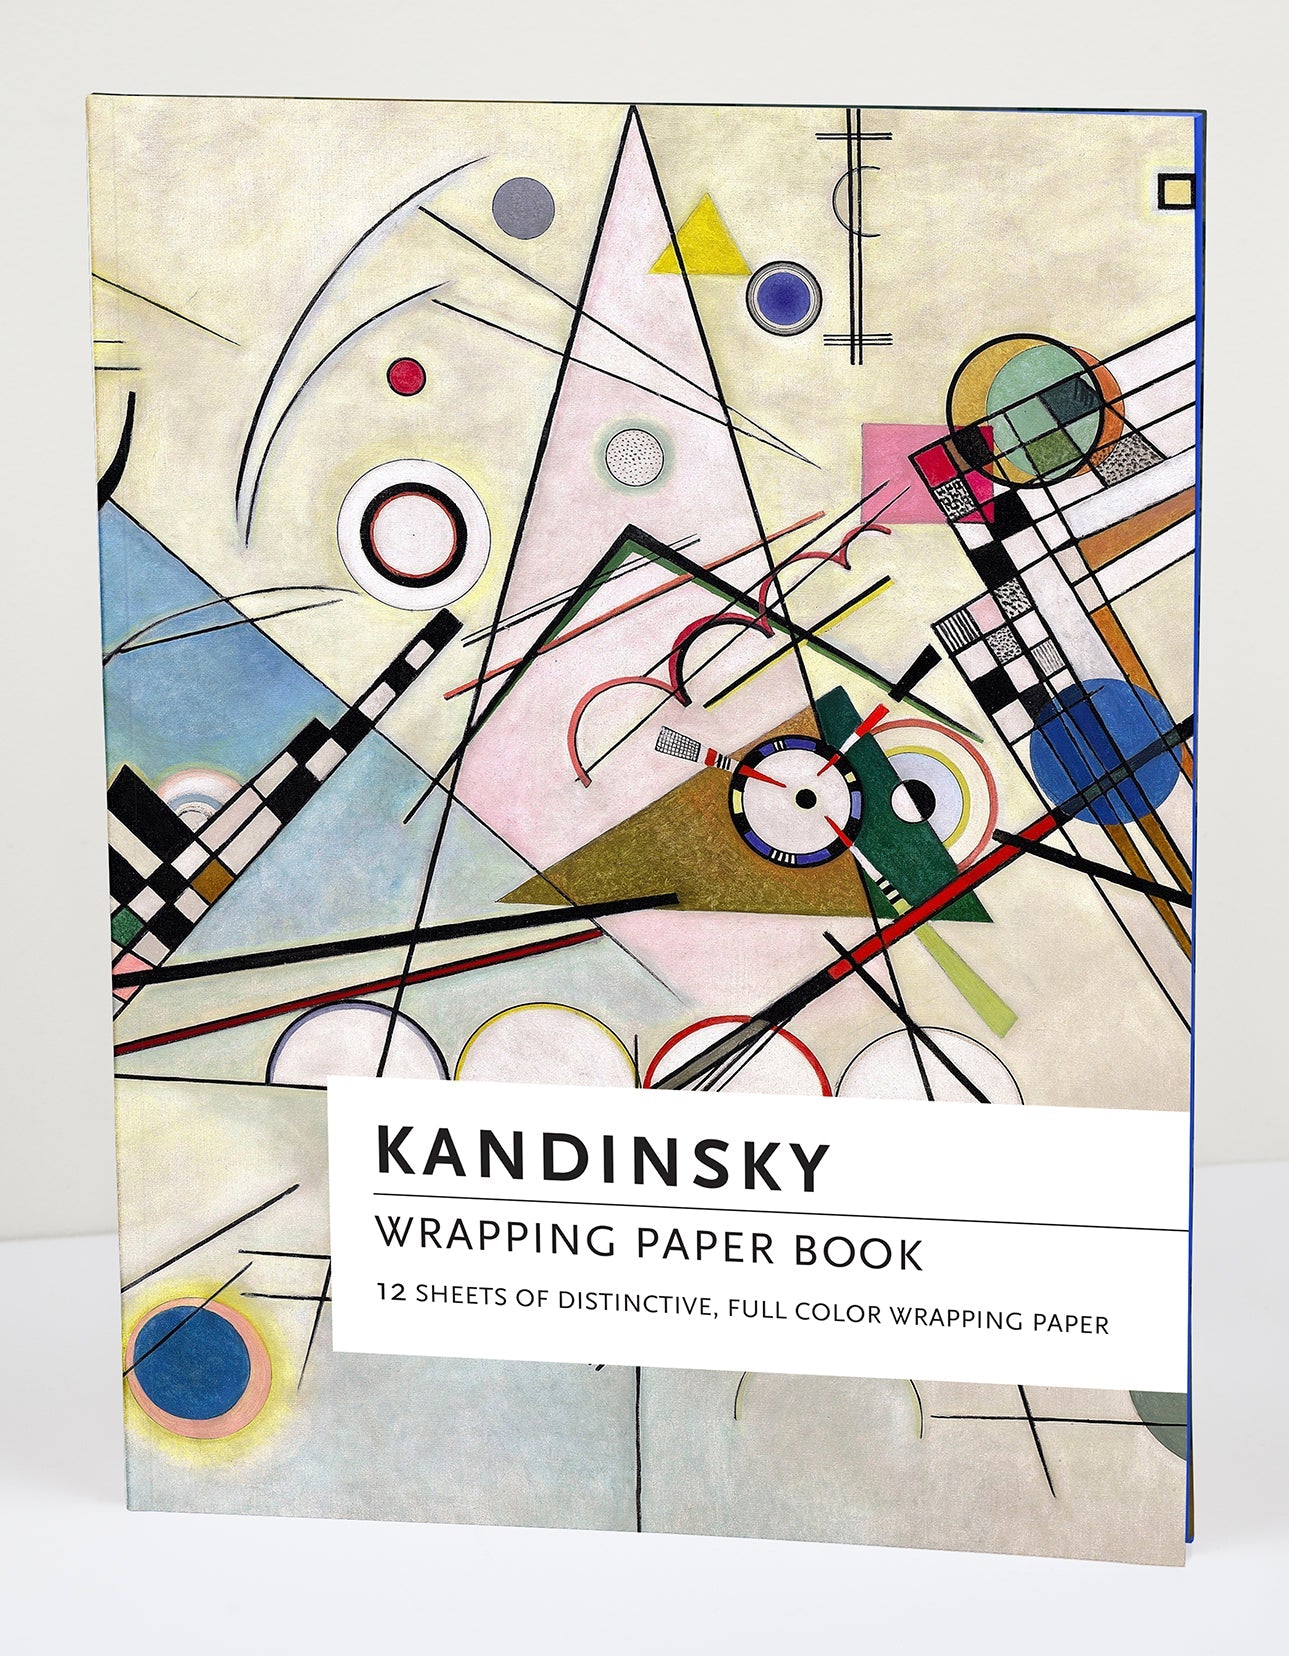 Kandinsky: Wrapping Paper